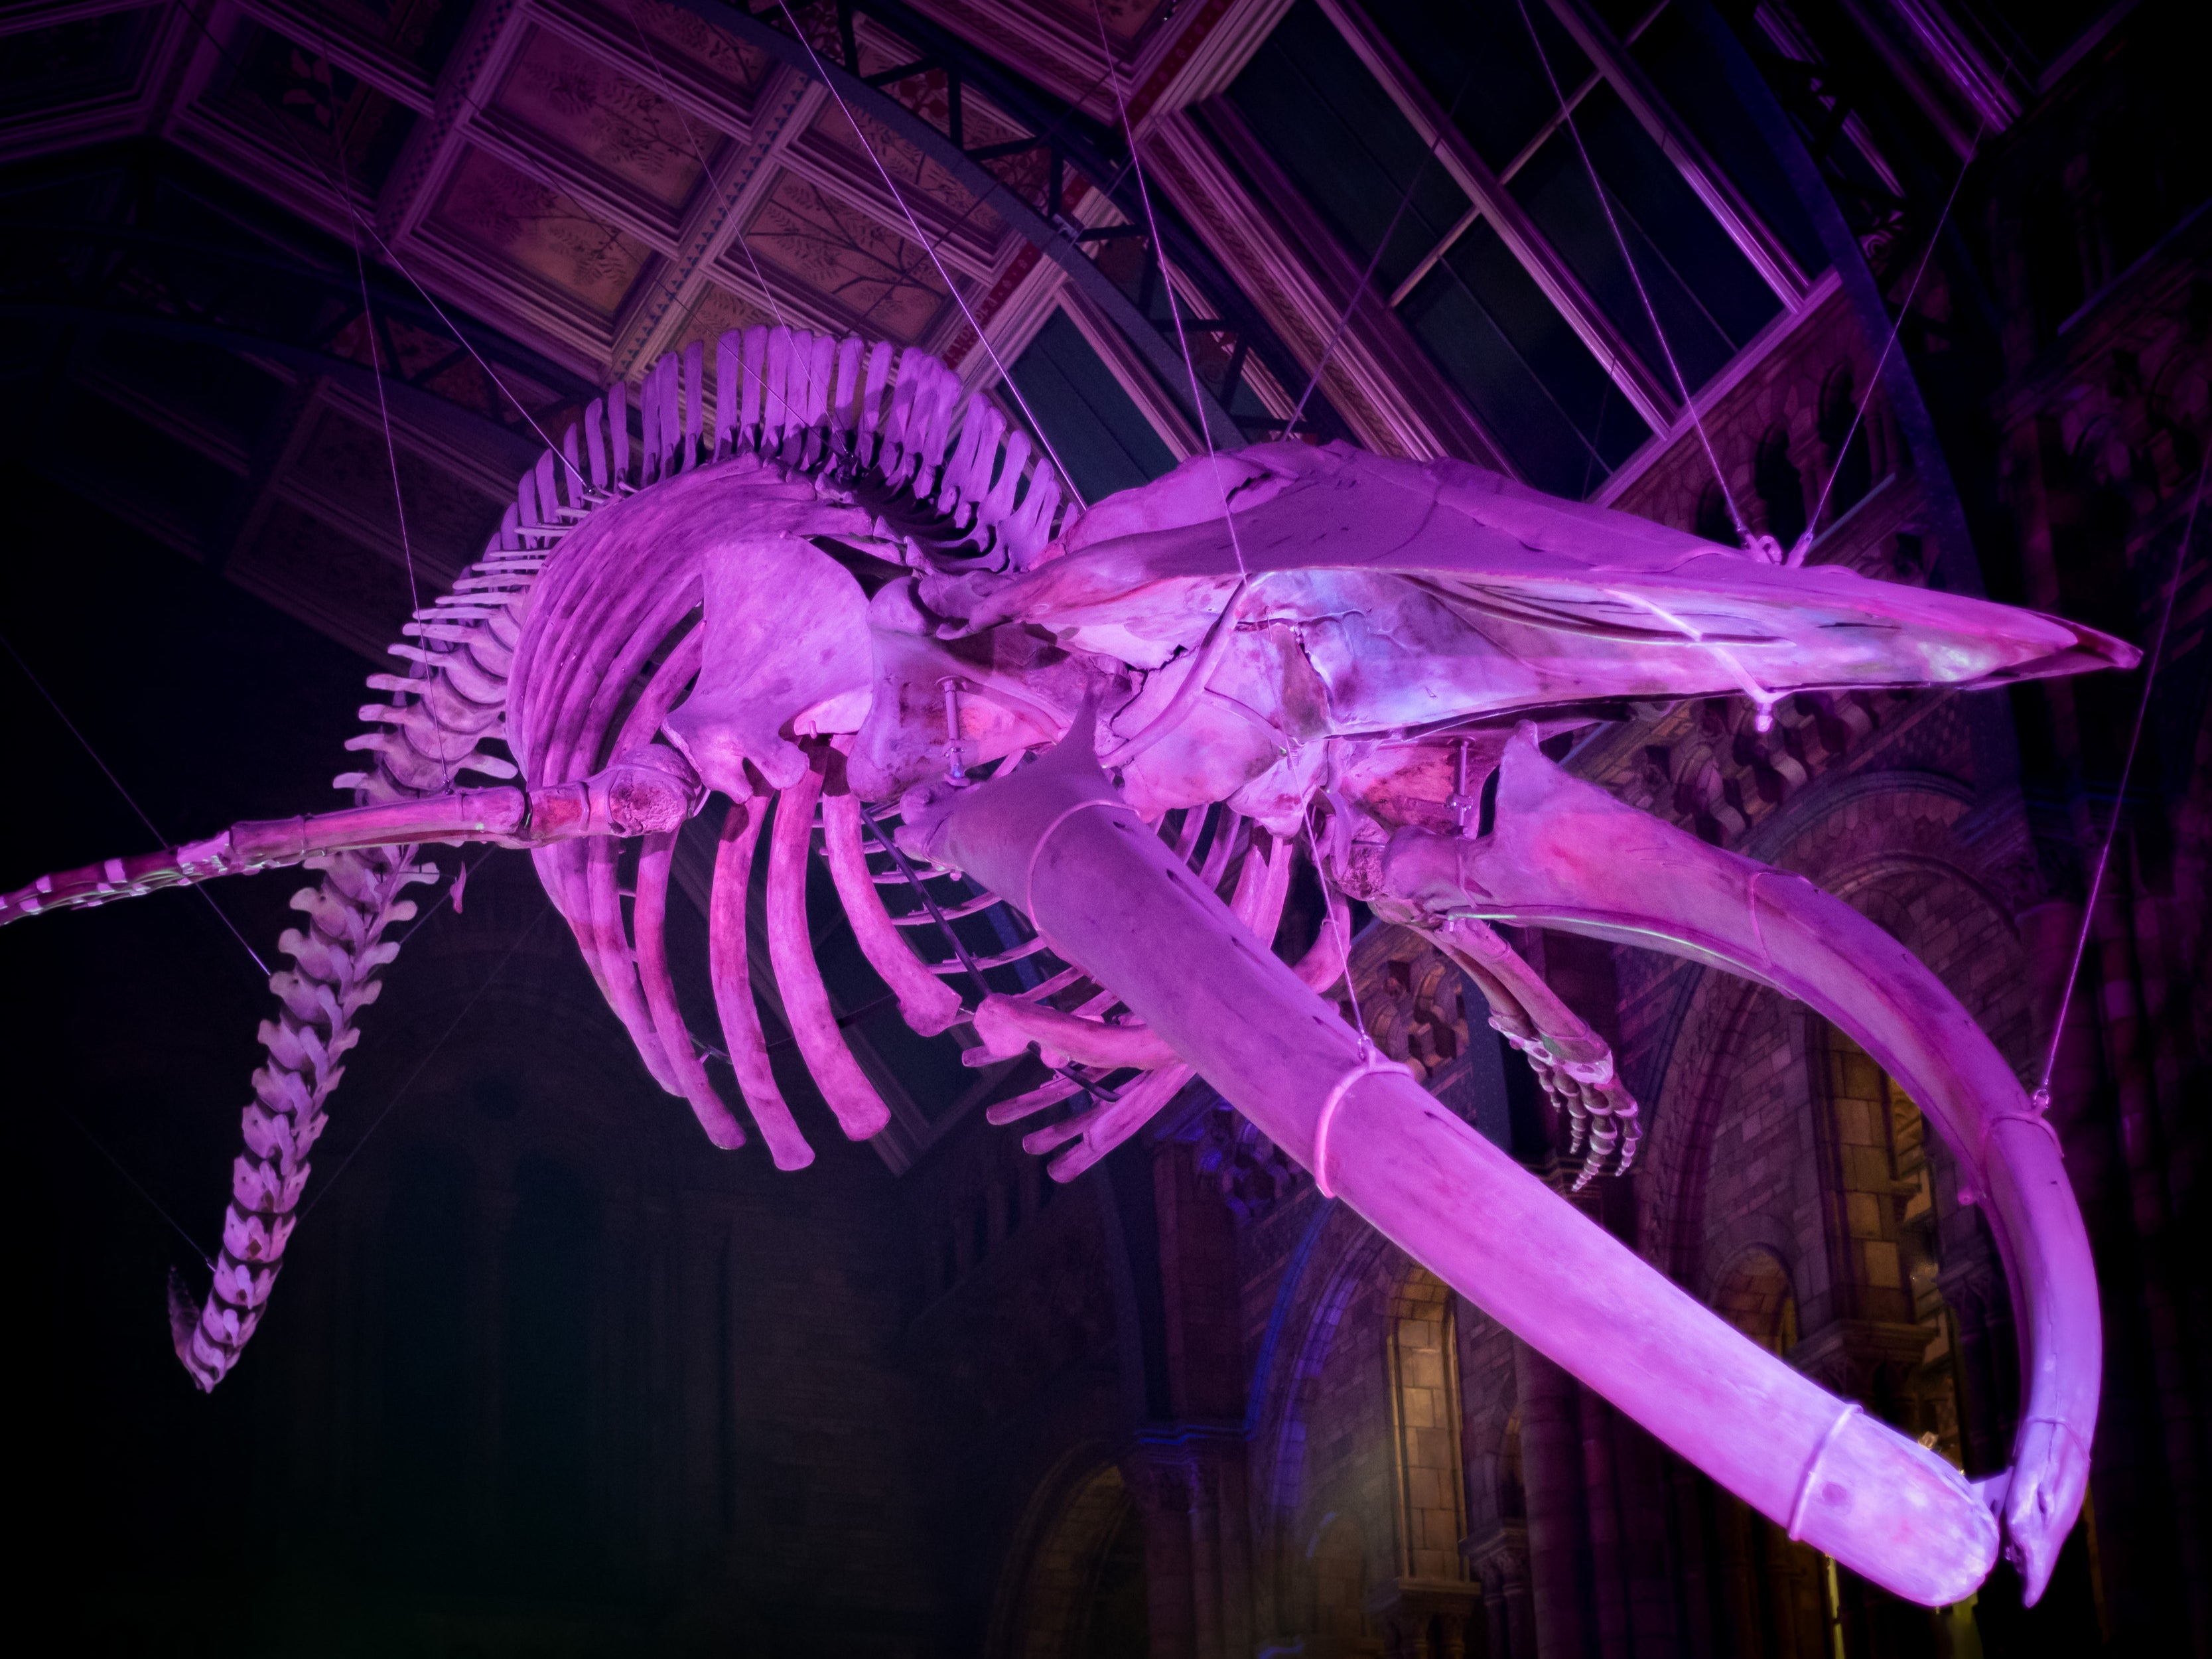 Night at the Museum fans will love spine-chilling after-hours fun at the Natural History Museum